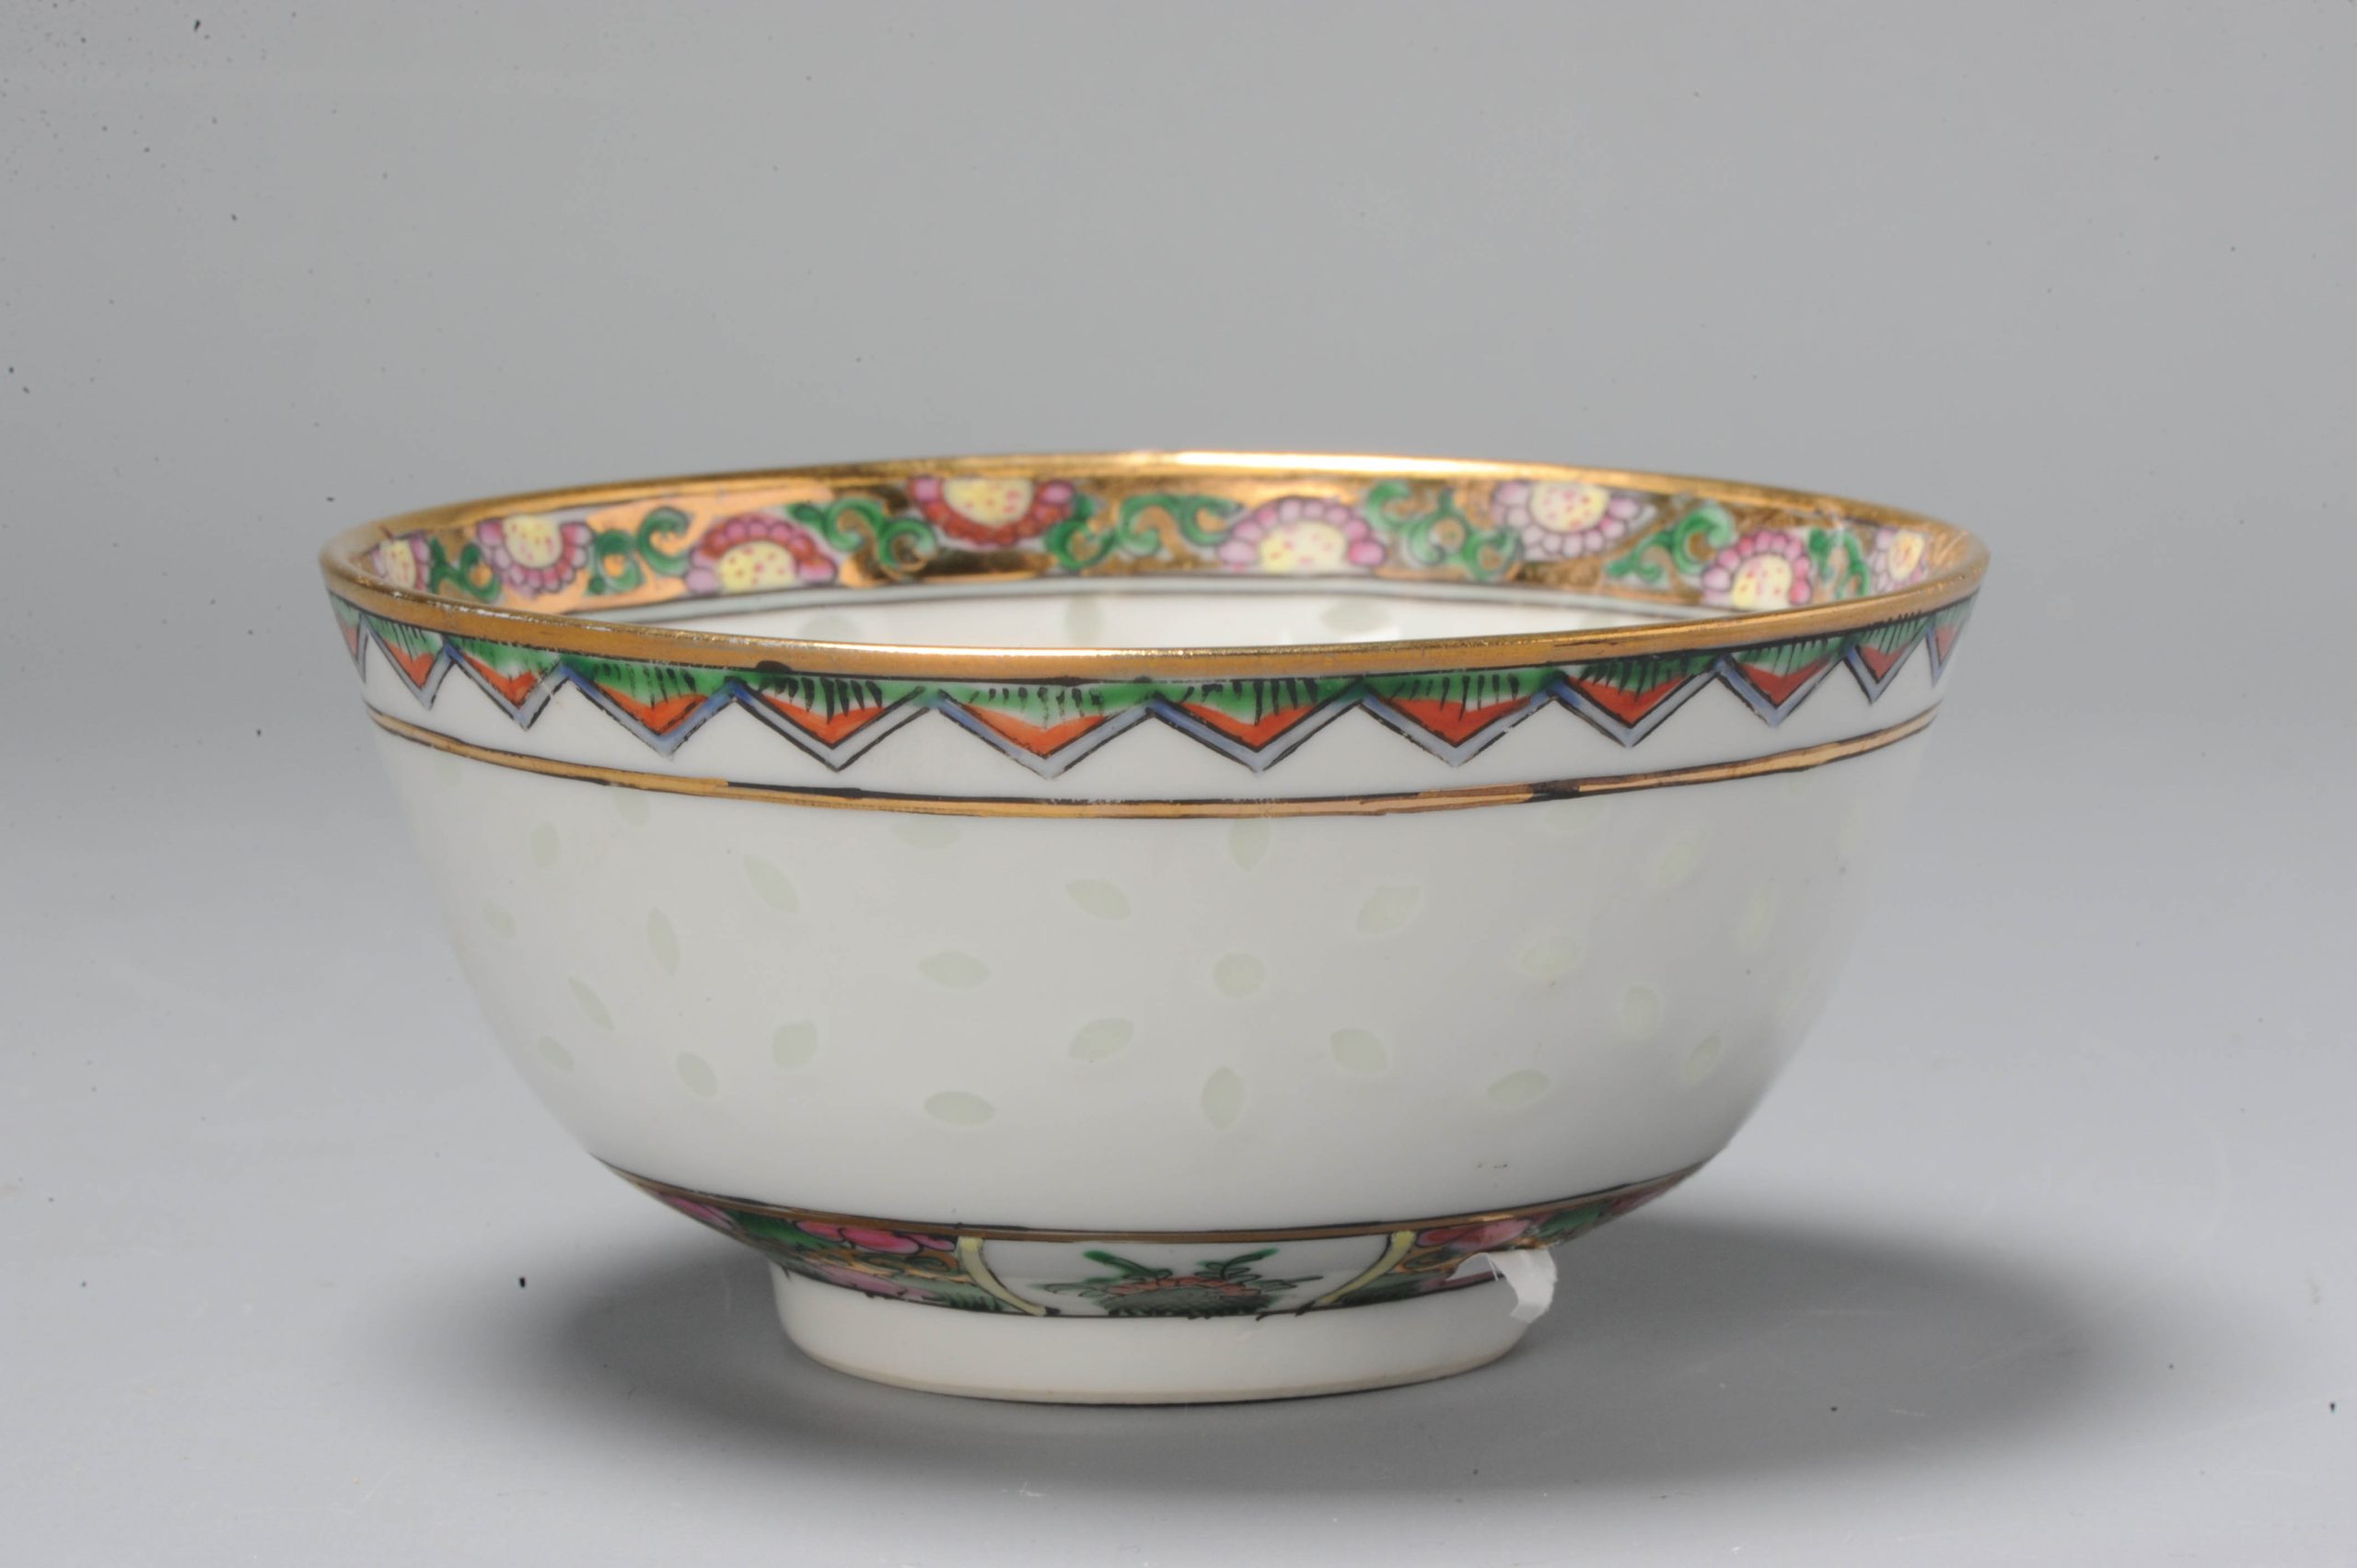 Antique Chinese Peoples Republic period Rice grain bowl with flowers, China 20th c.